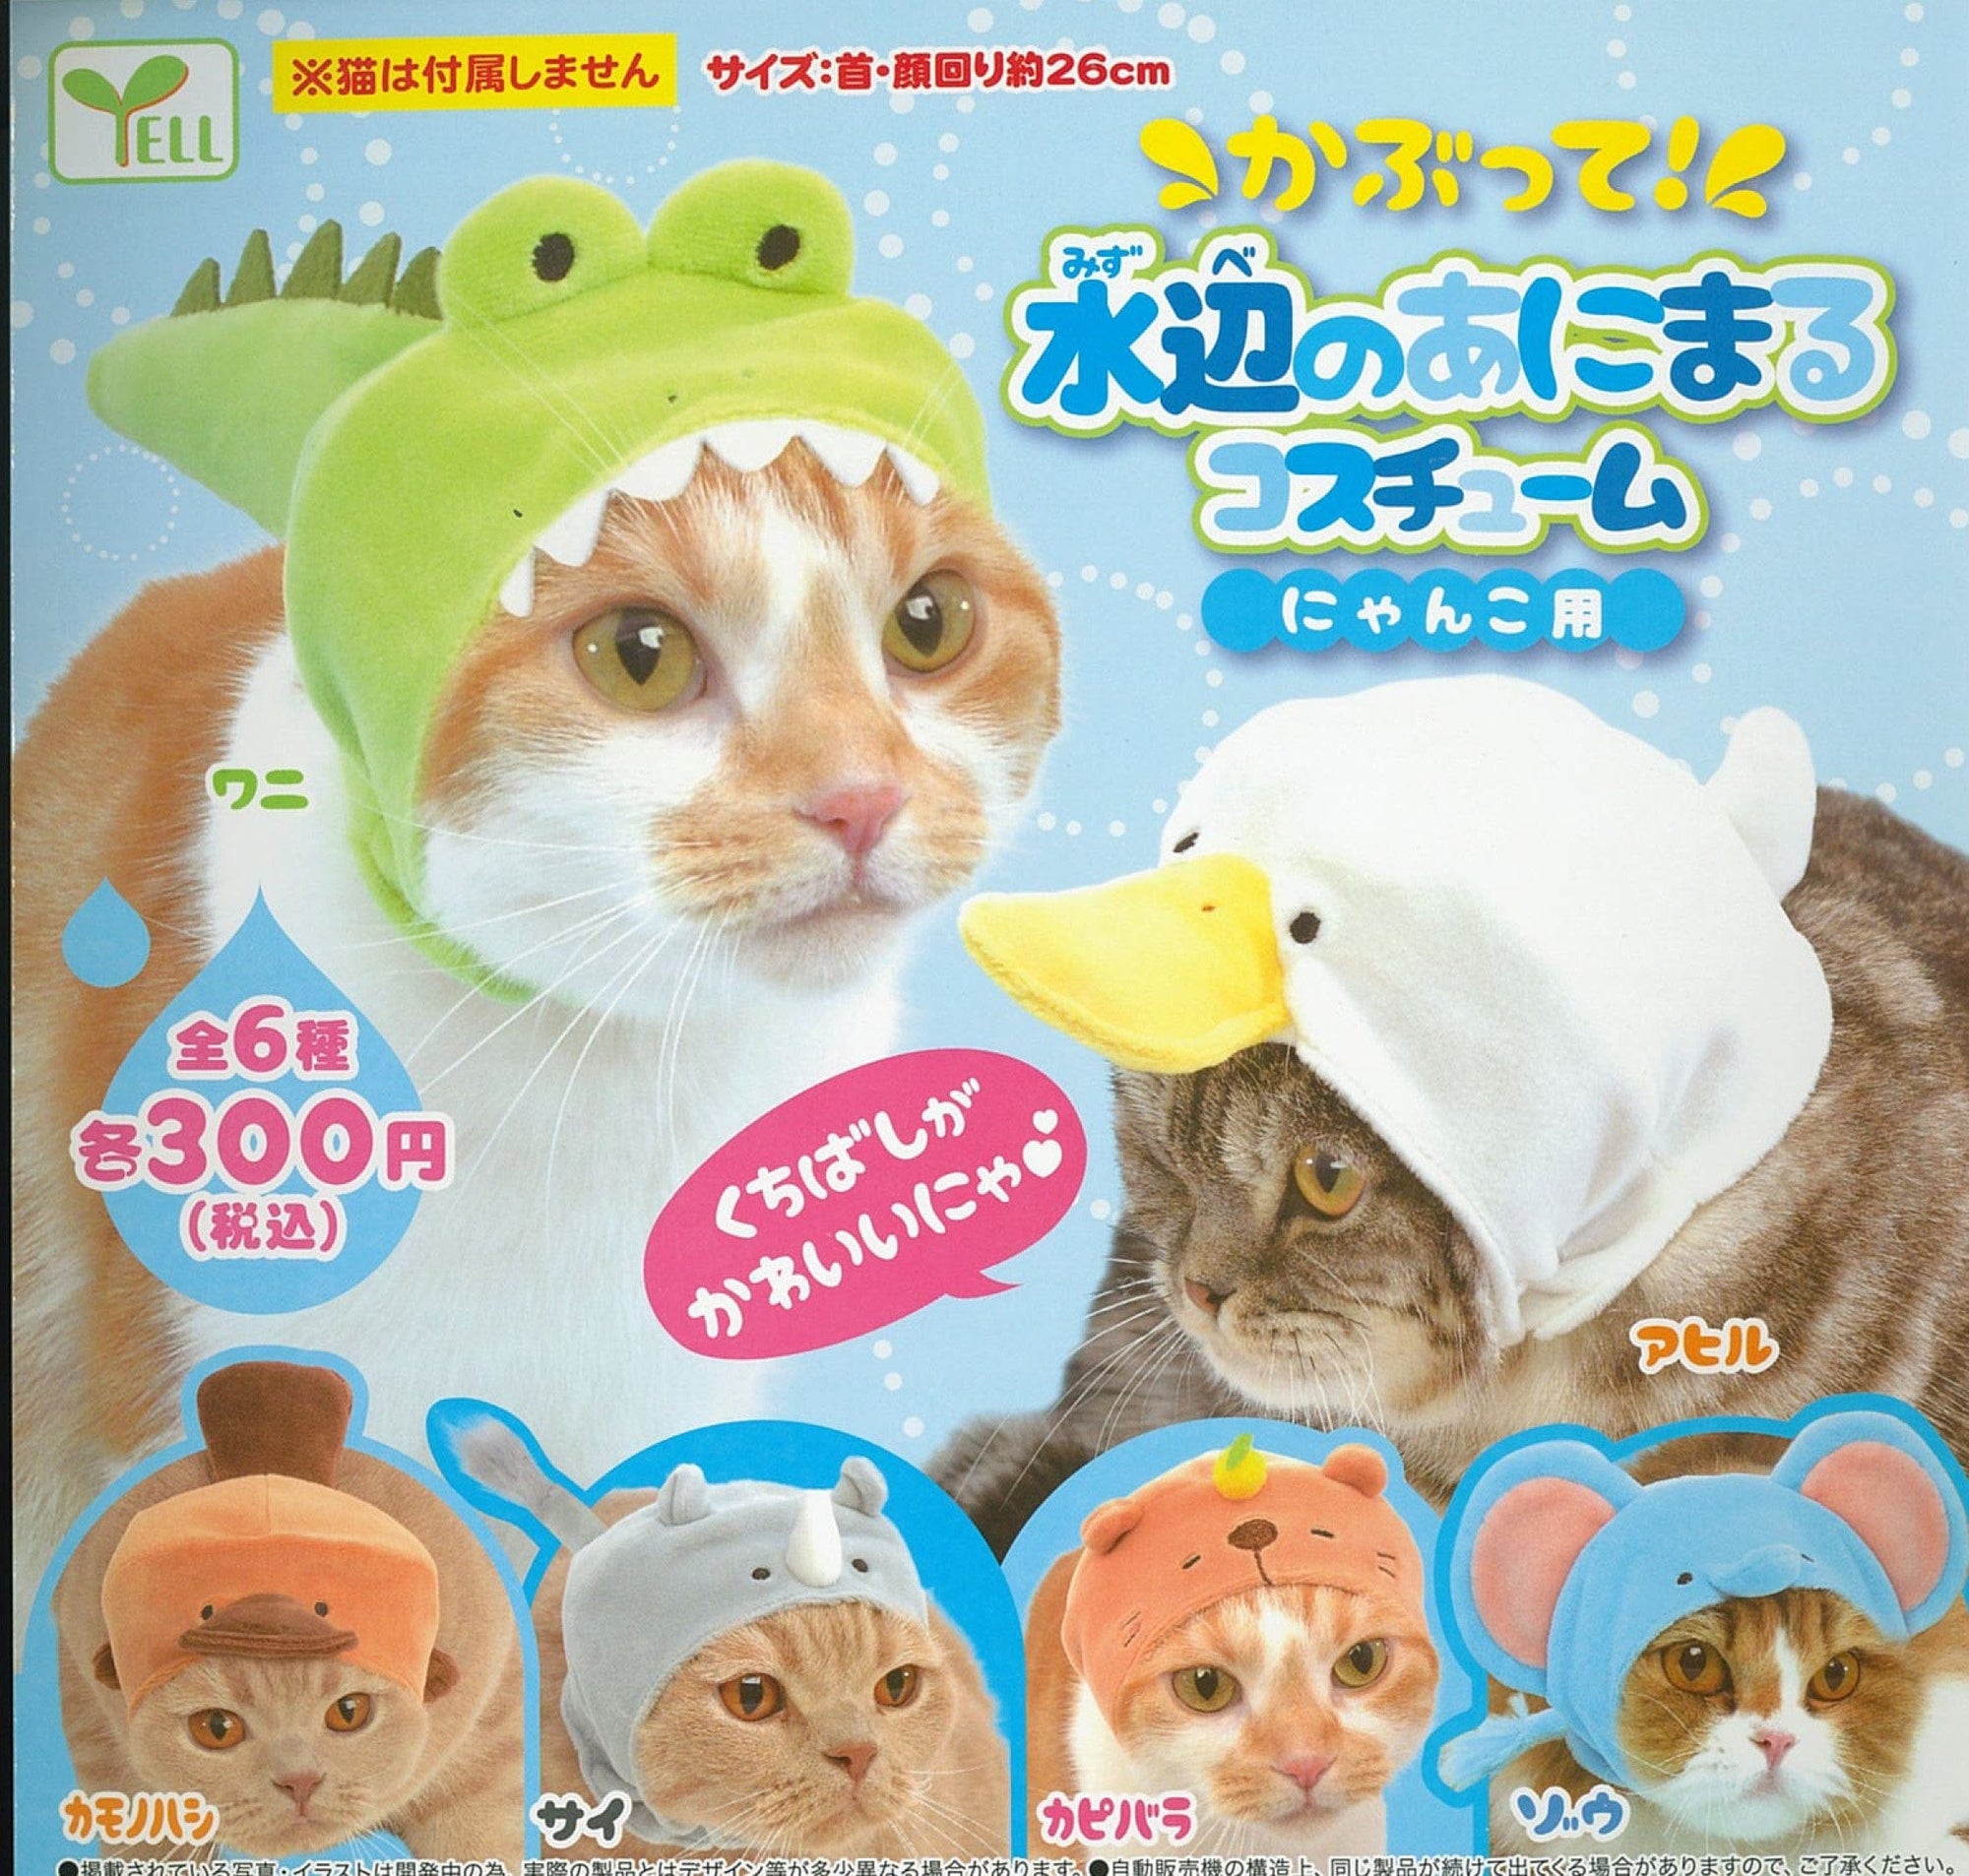 Yell CP0419 - Kabutte! Riparian Animal Costume for Nyanko - Complete Set